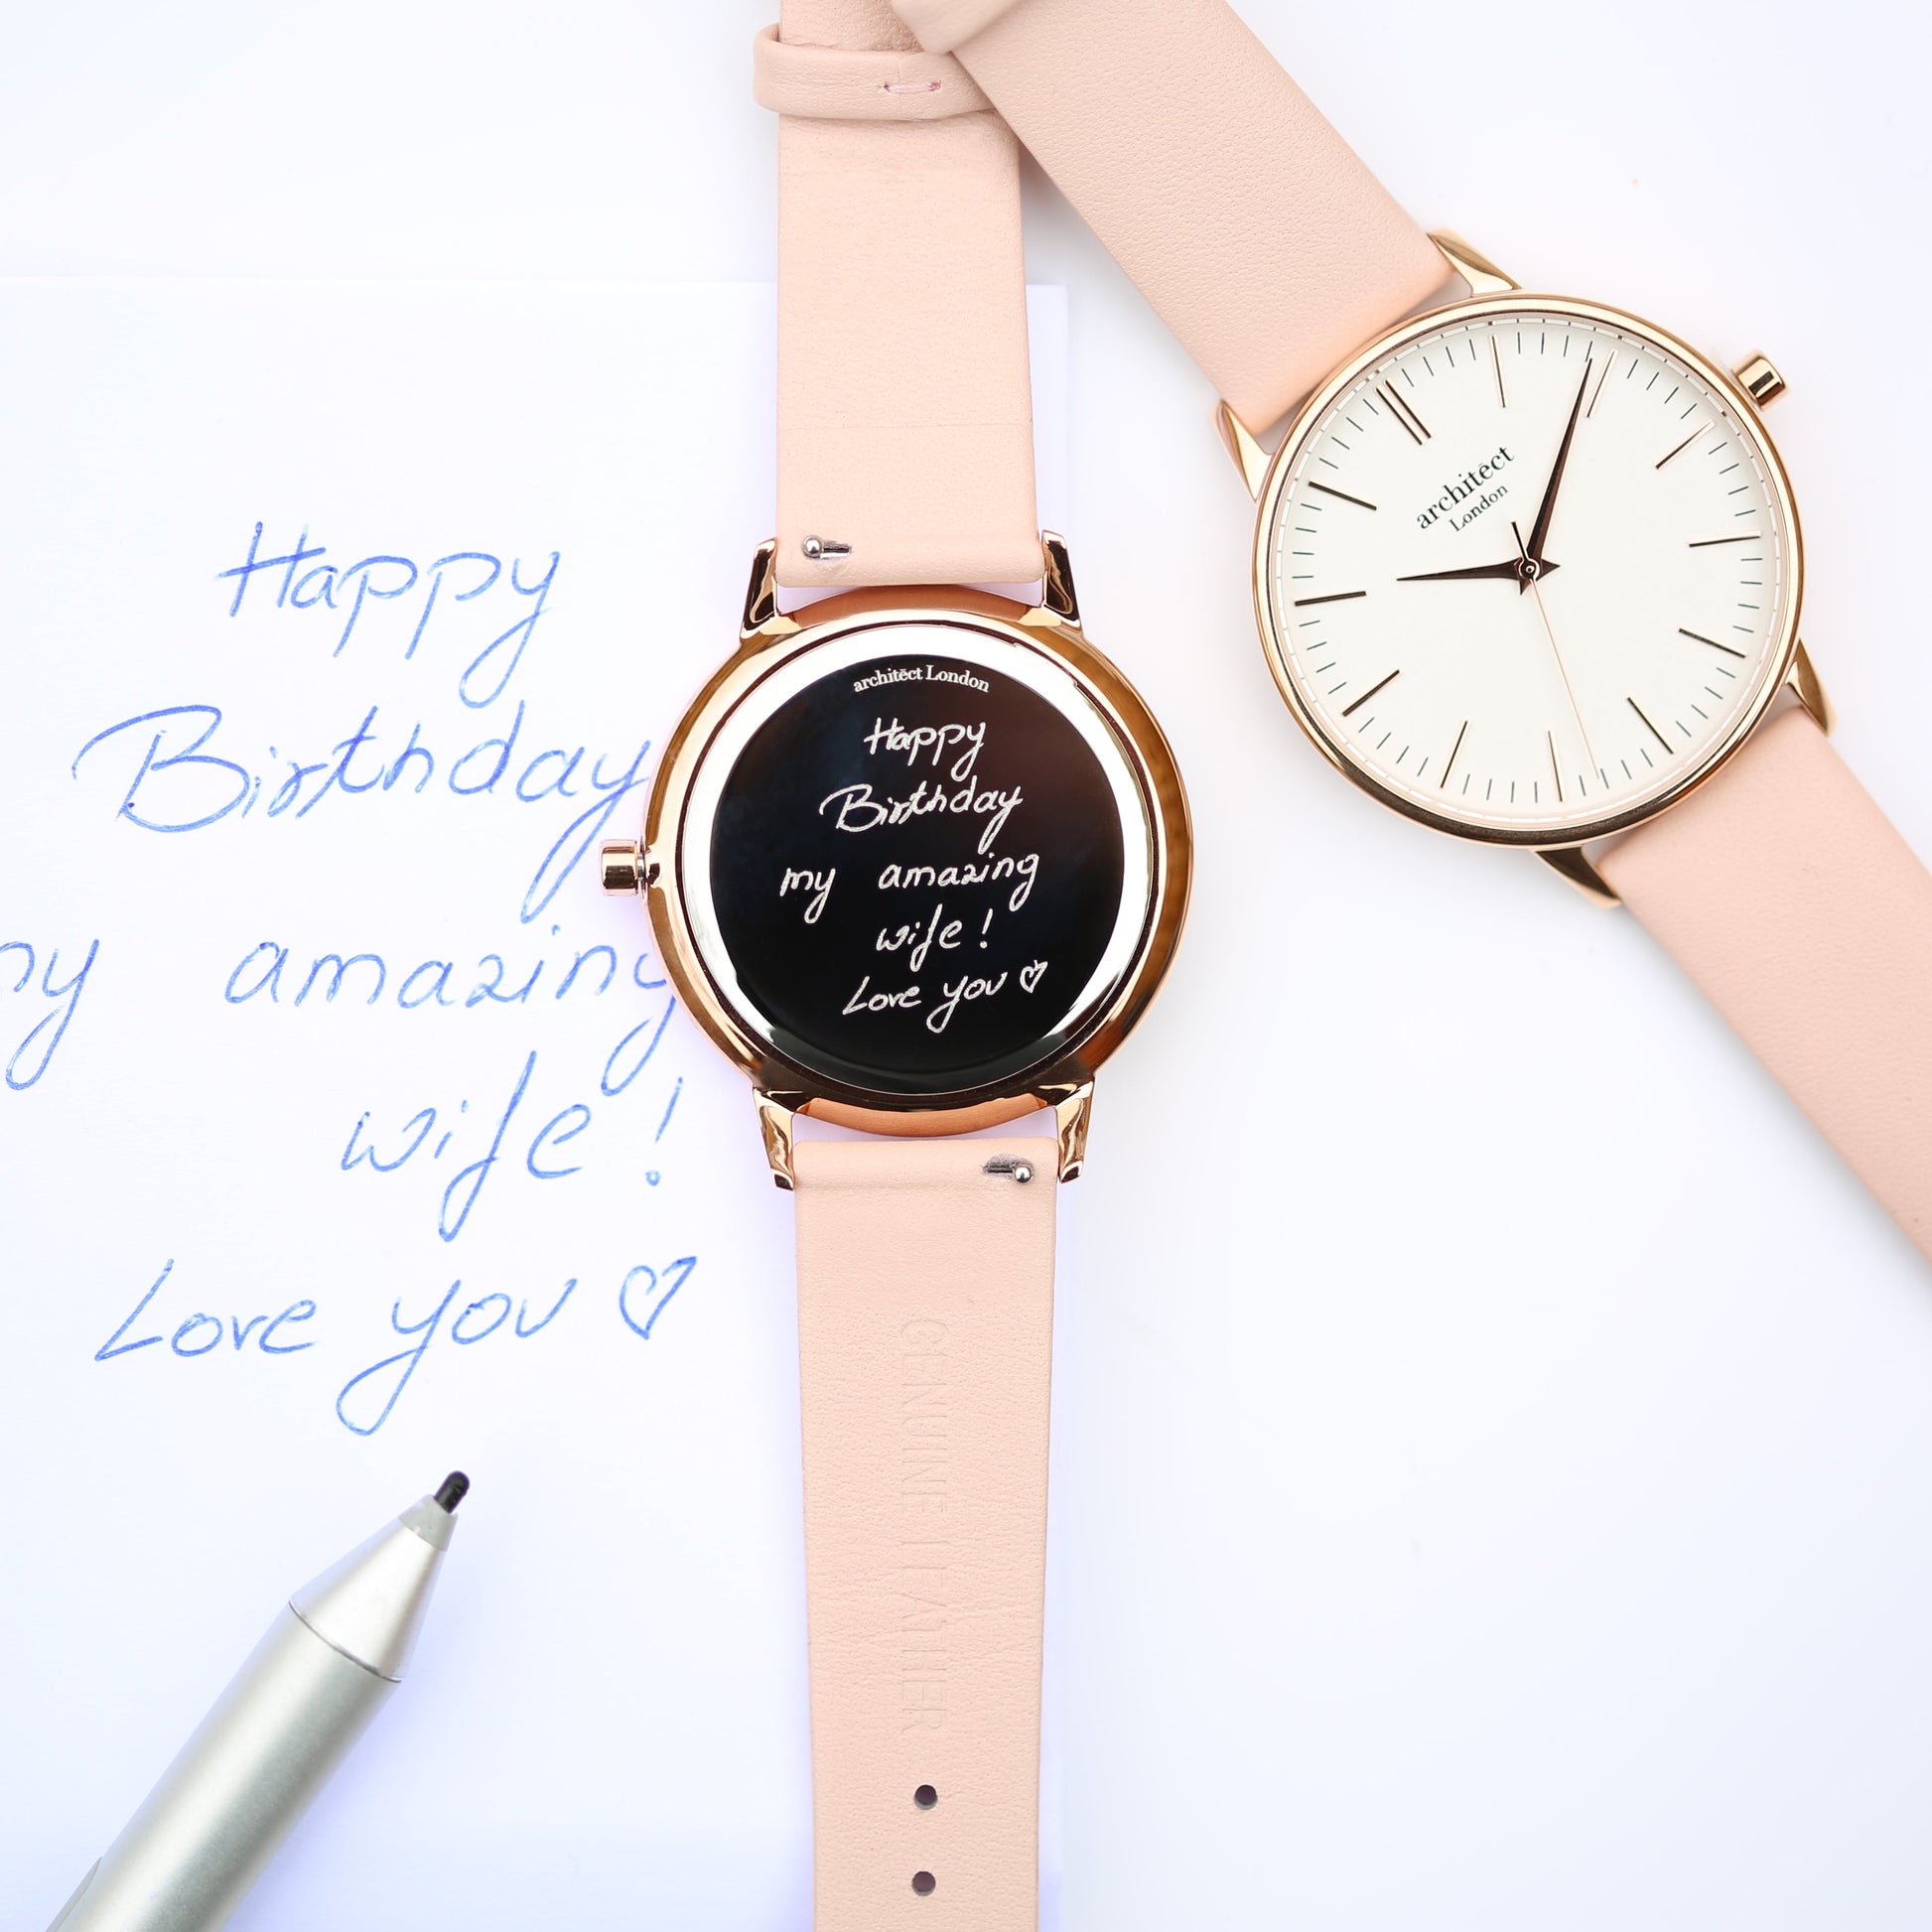 Personalized Ladies' Watches - Ladies Handwriting Engraved Watch in Light Pink 